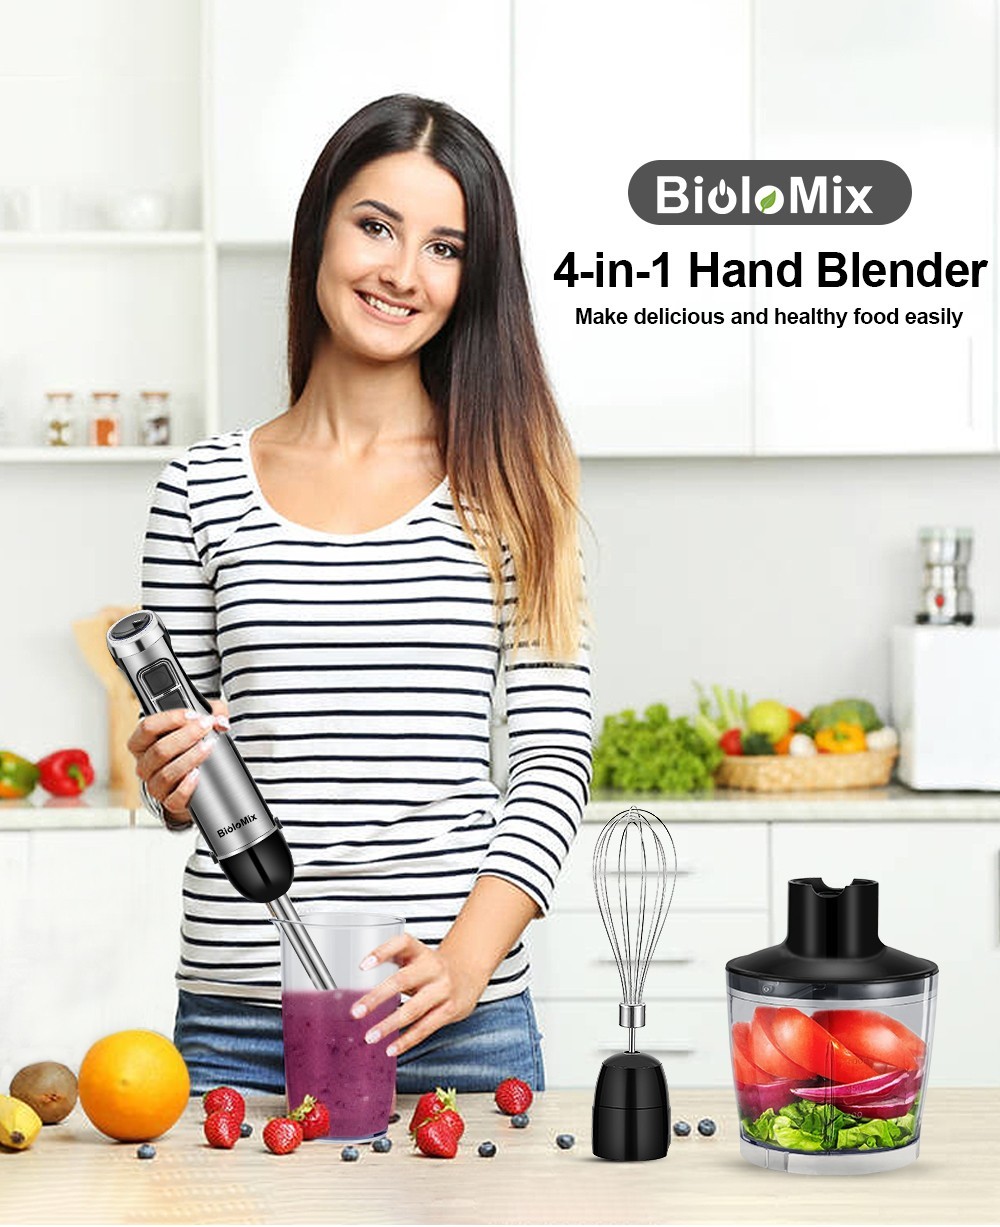 Get the BioloMix BHB1200 4 in 1 1200W Handheld Blender for Only 45€ with Coupon!